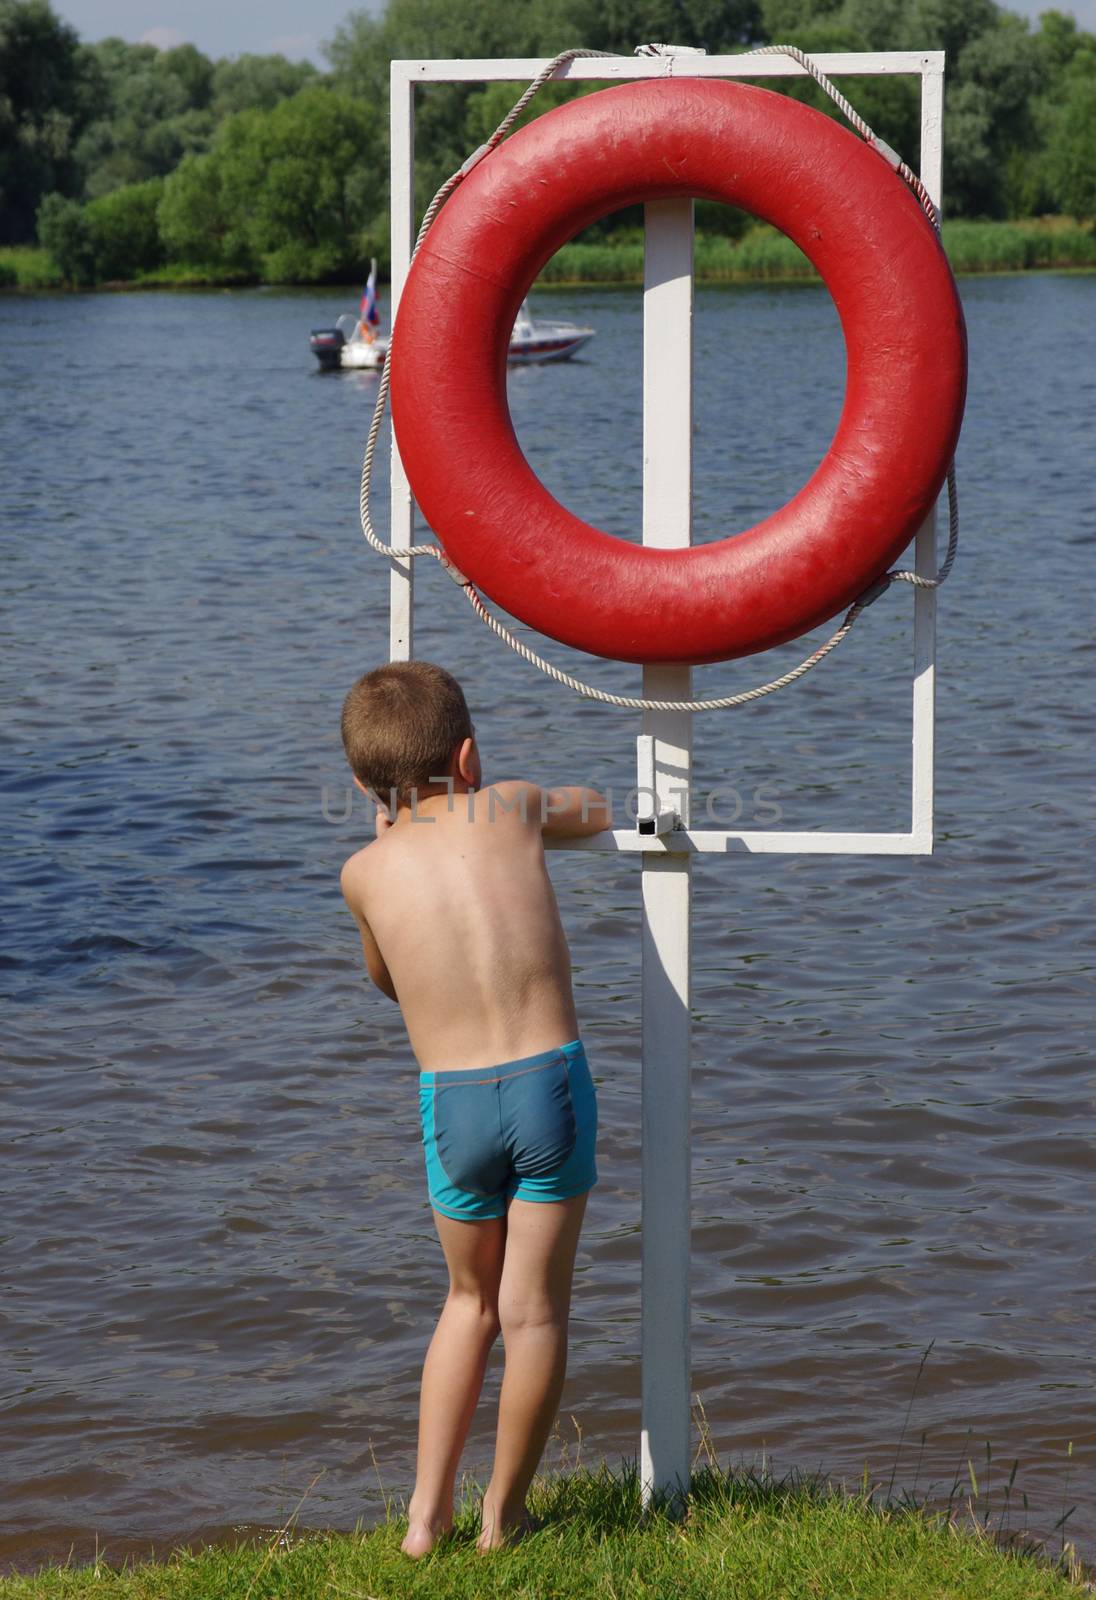 The boy is standing on the shore of the pond next to the big red life ring